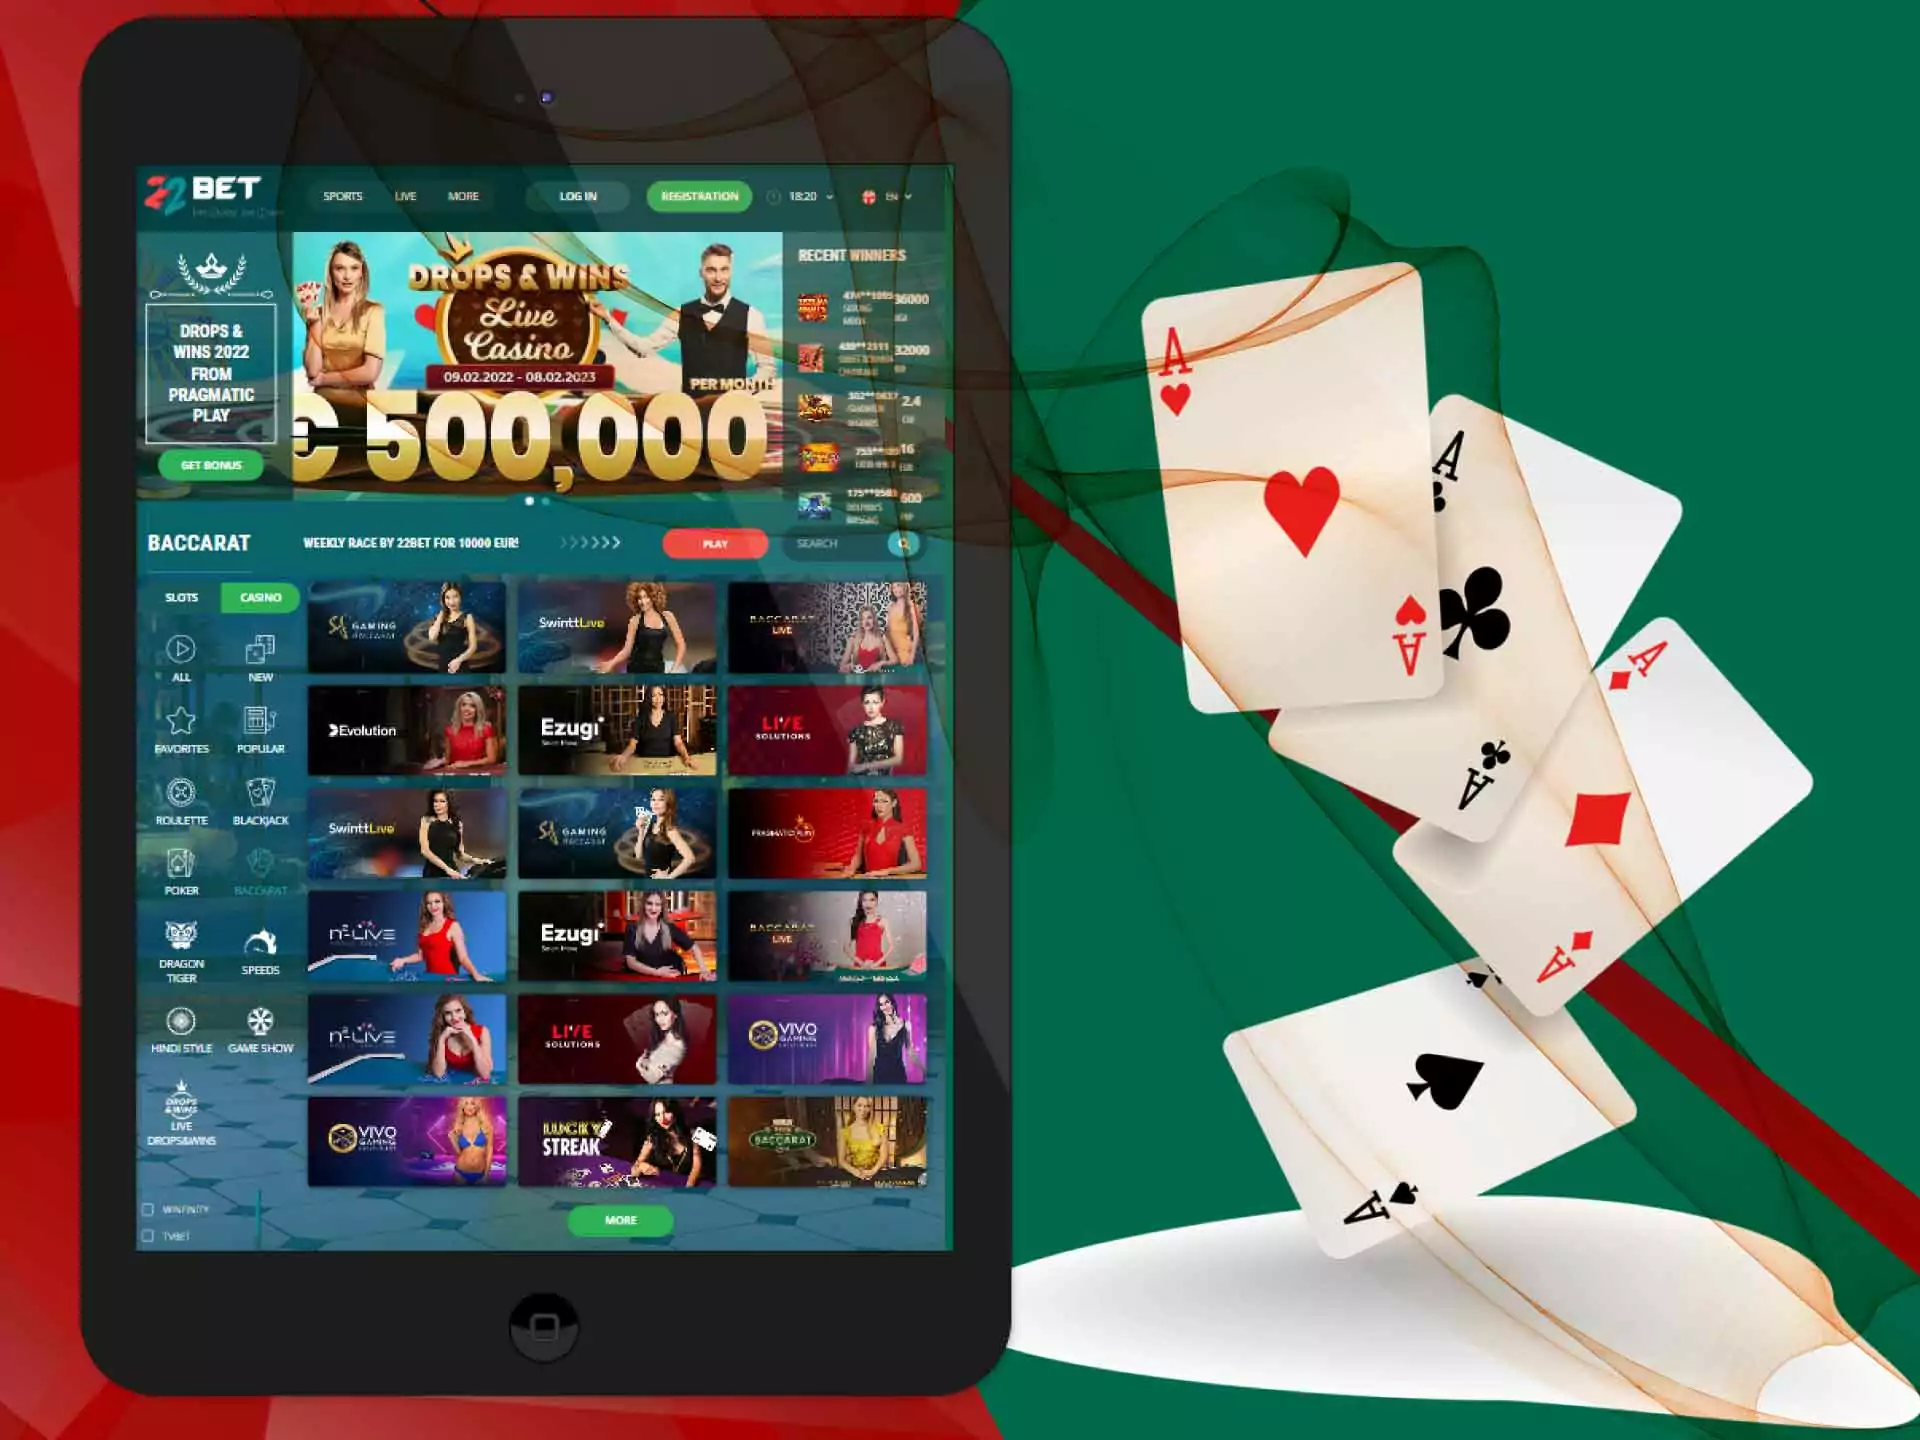 Try baccarat games and win money at 22bet.